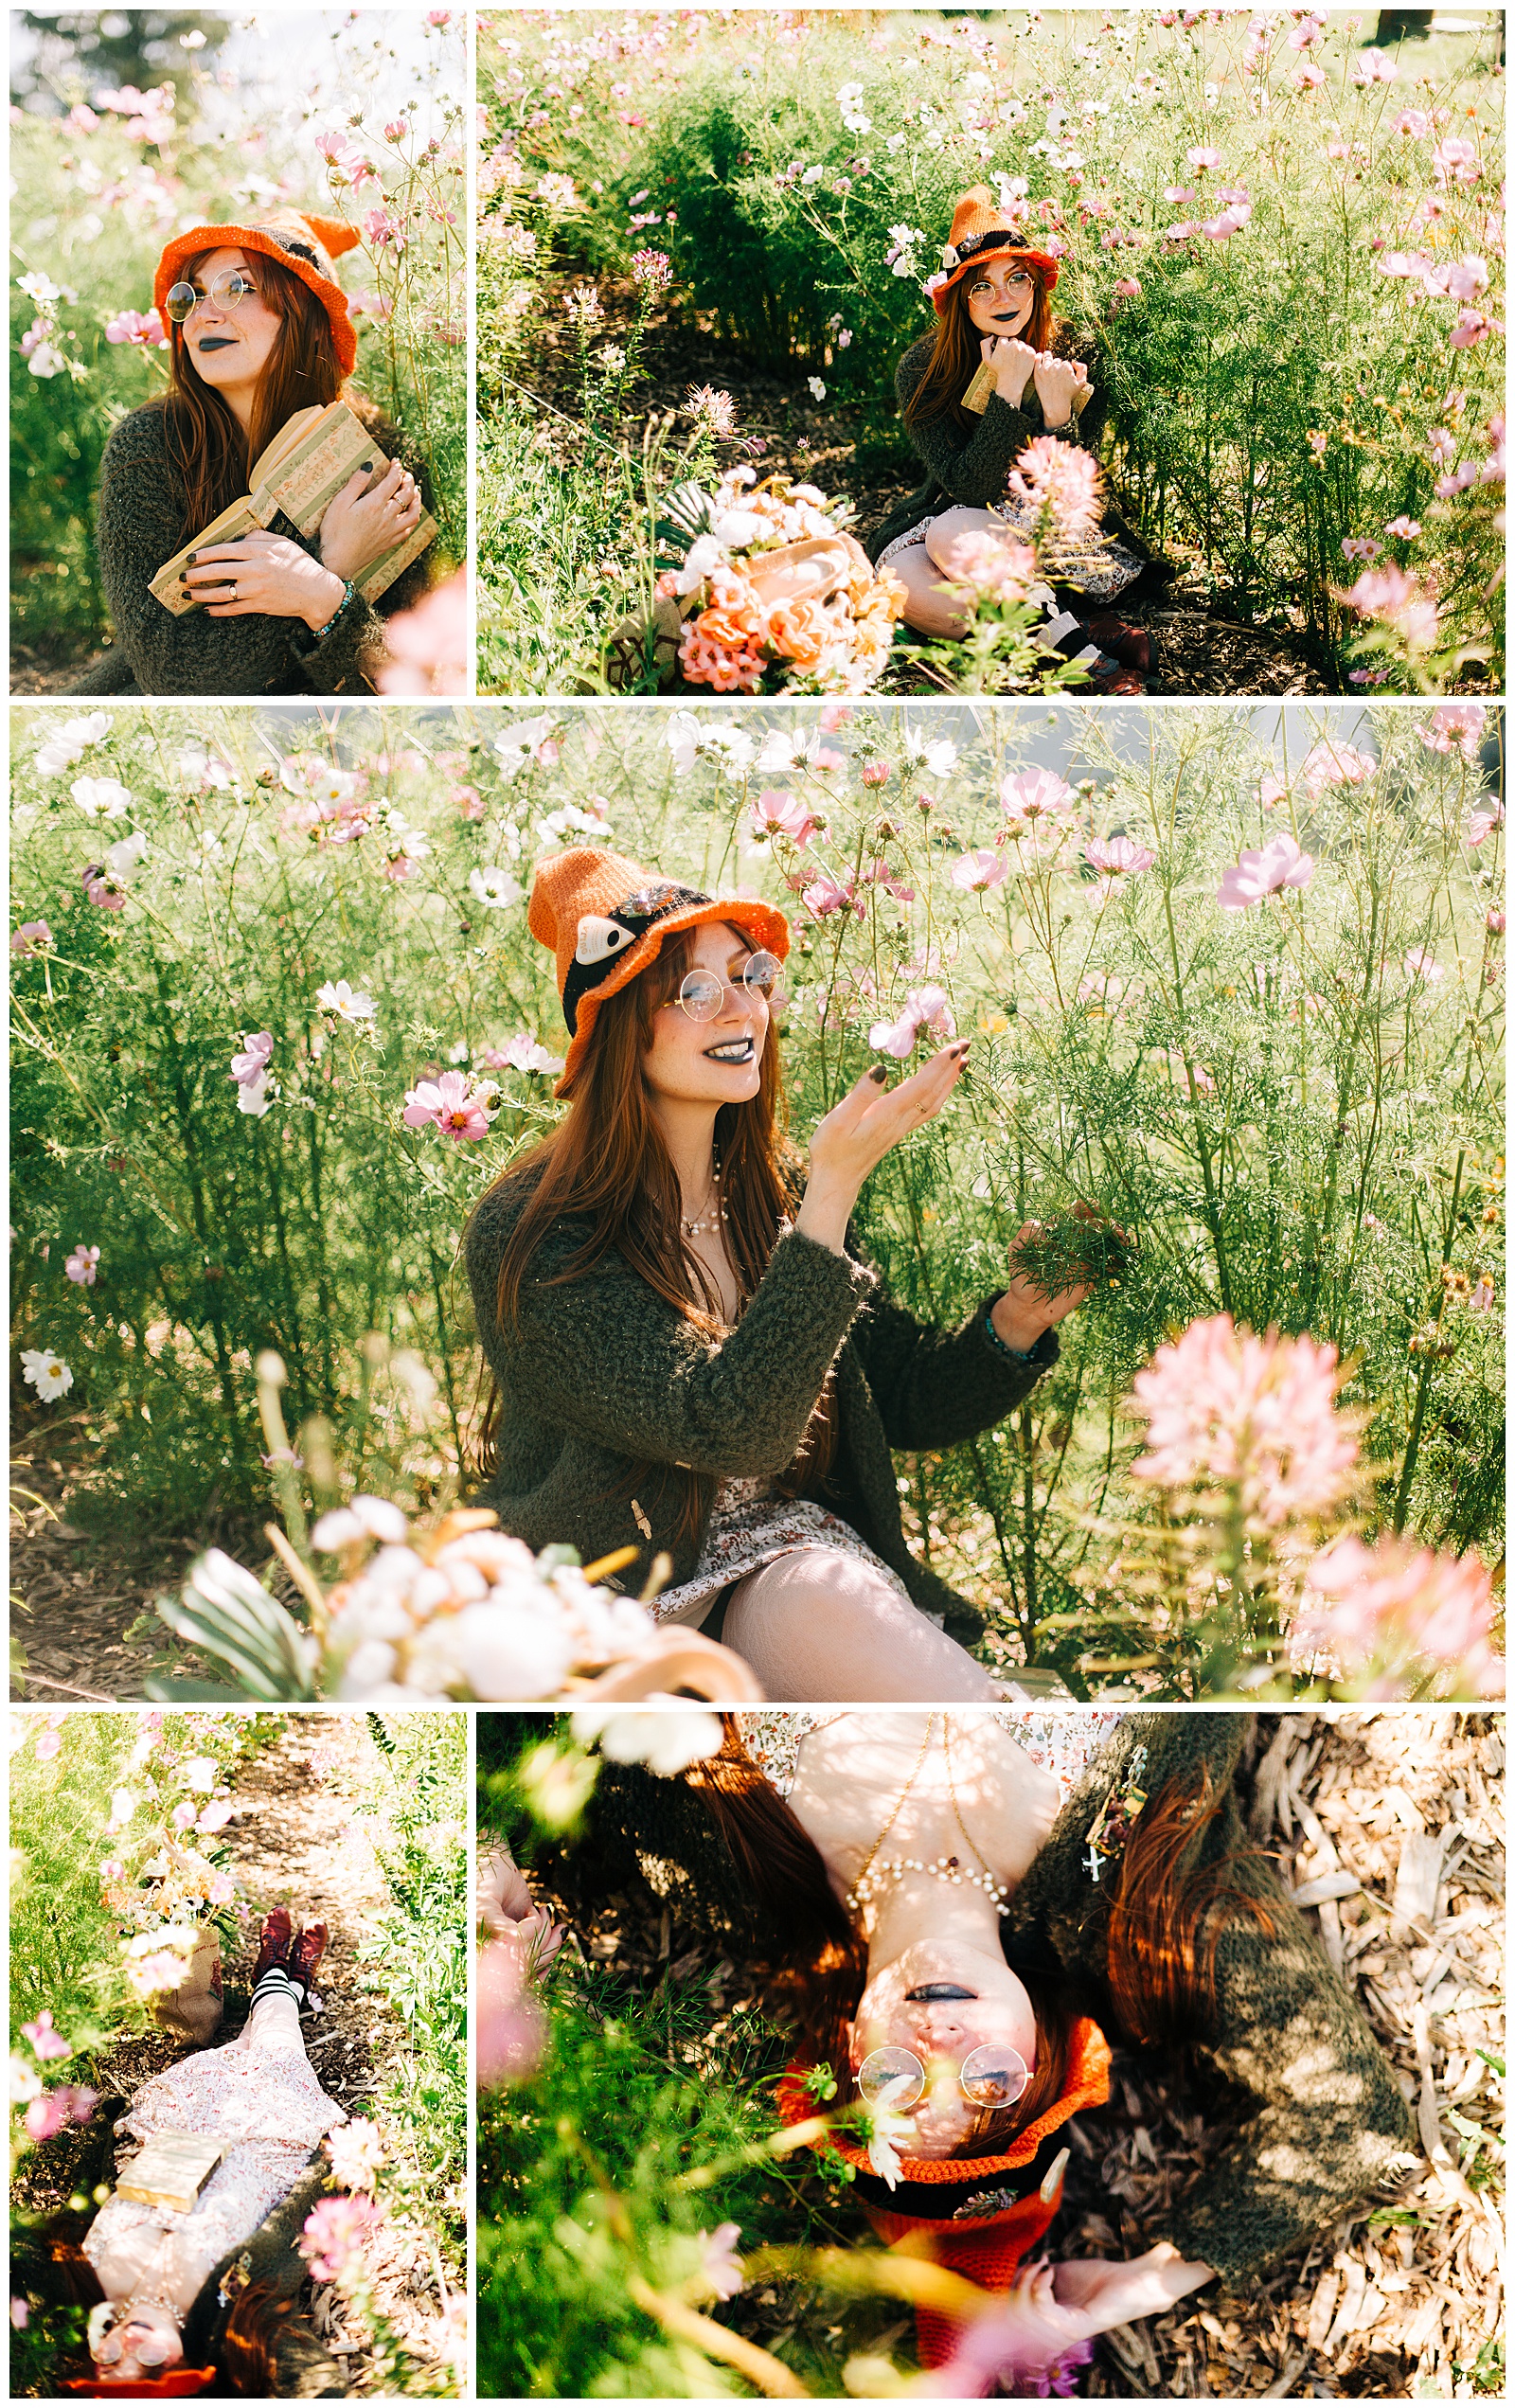 Cosplay Witch laying in a flower garden holding a book